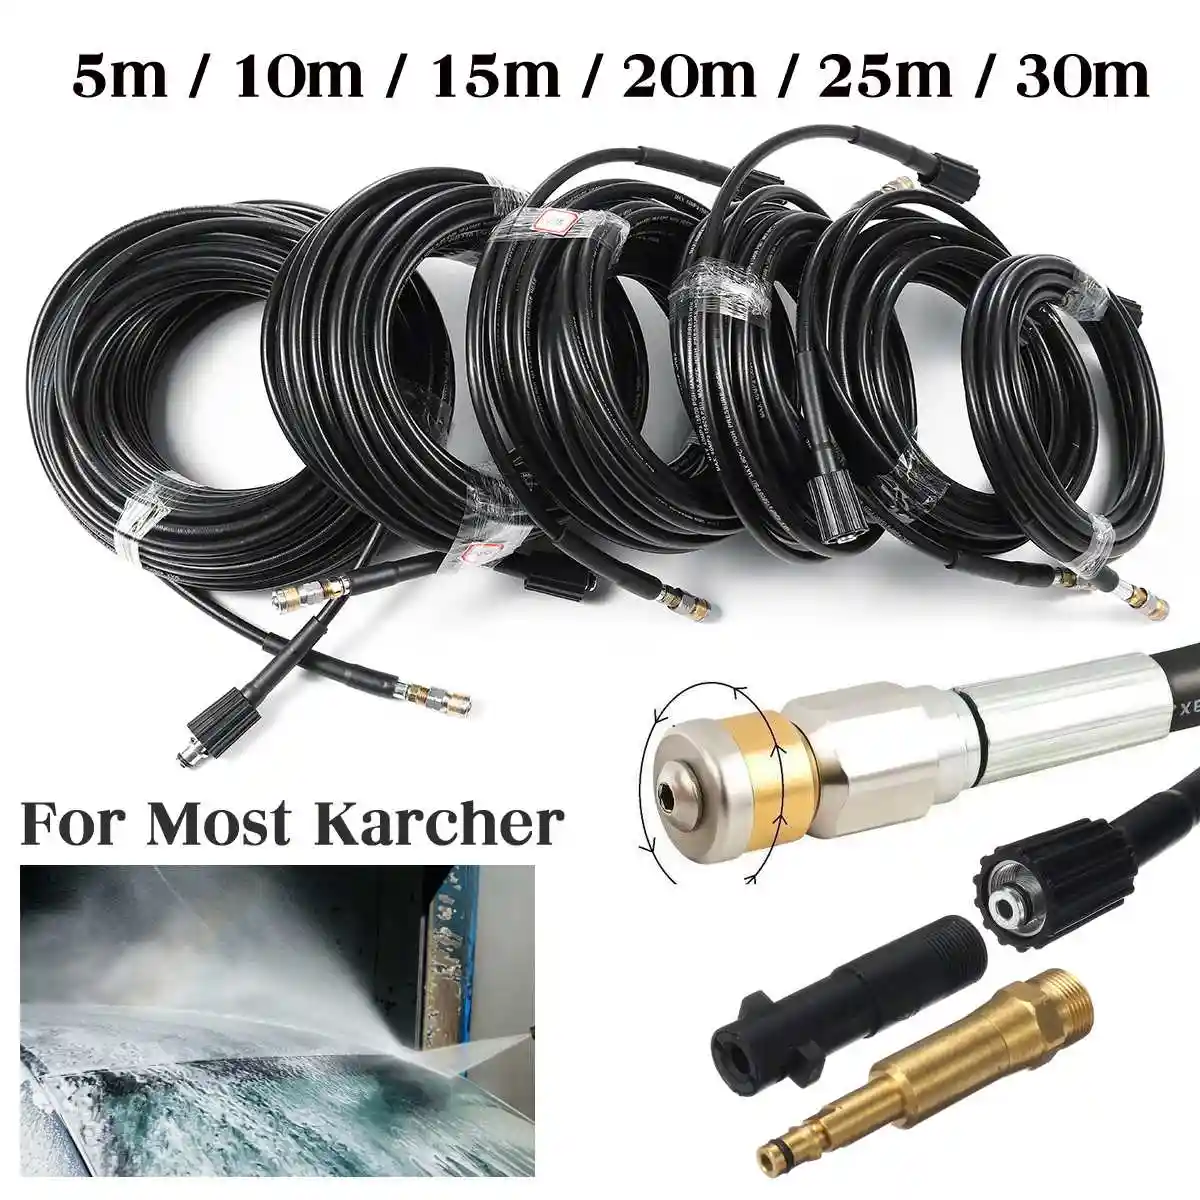 5M High Power Pressure Washer Clean Hose Extension Washing Tube Cleaning 5800PSI